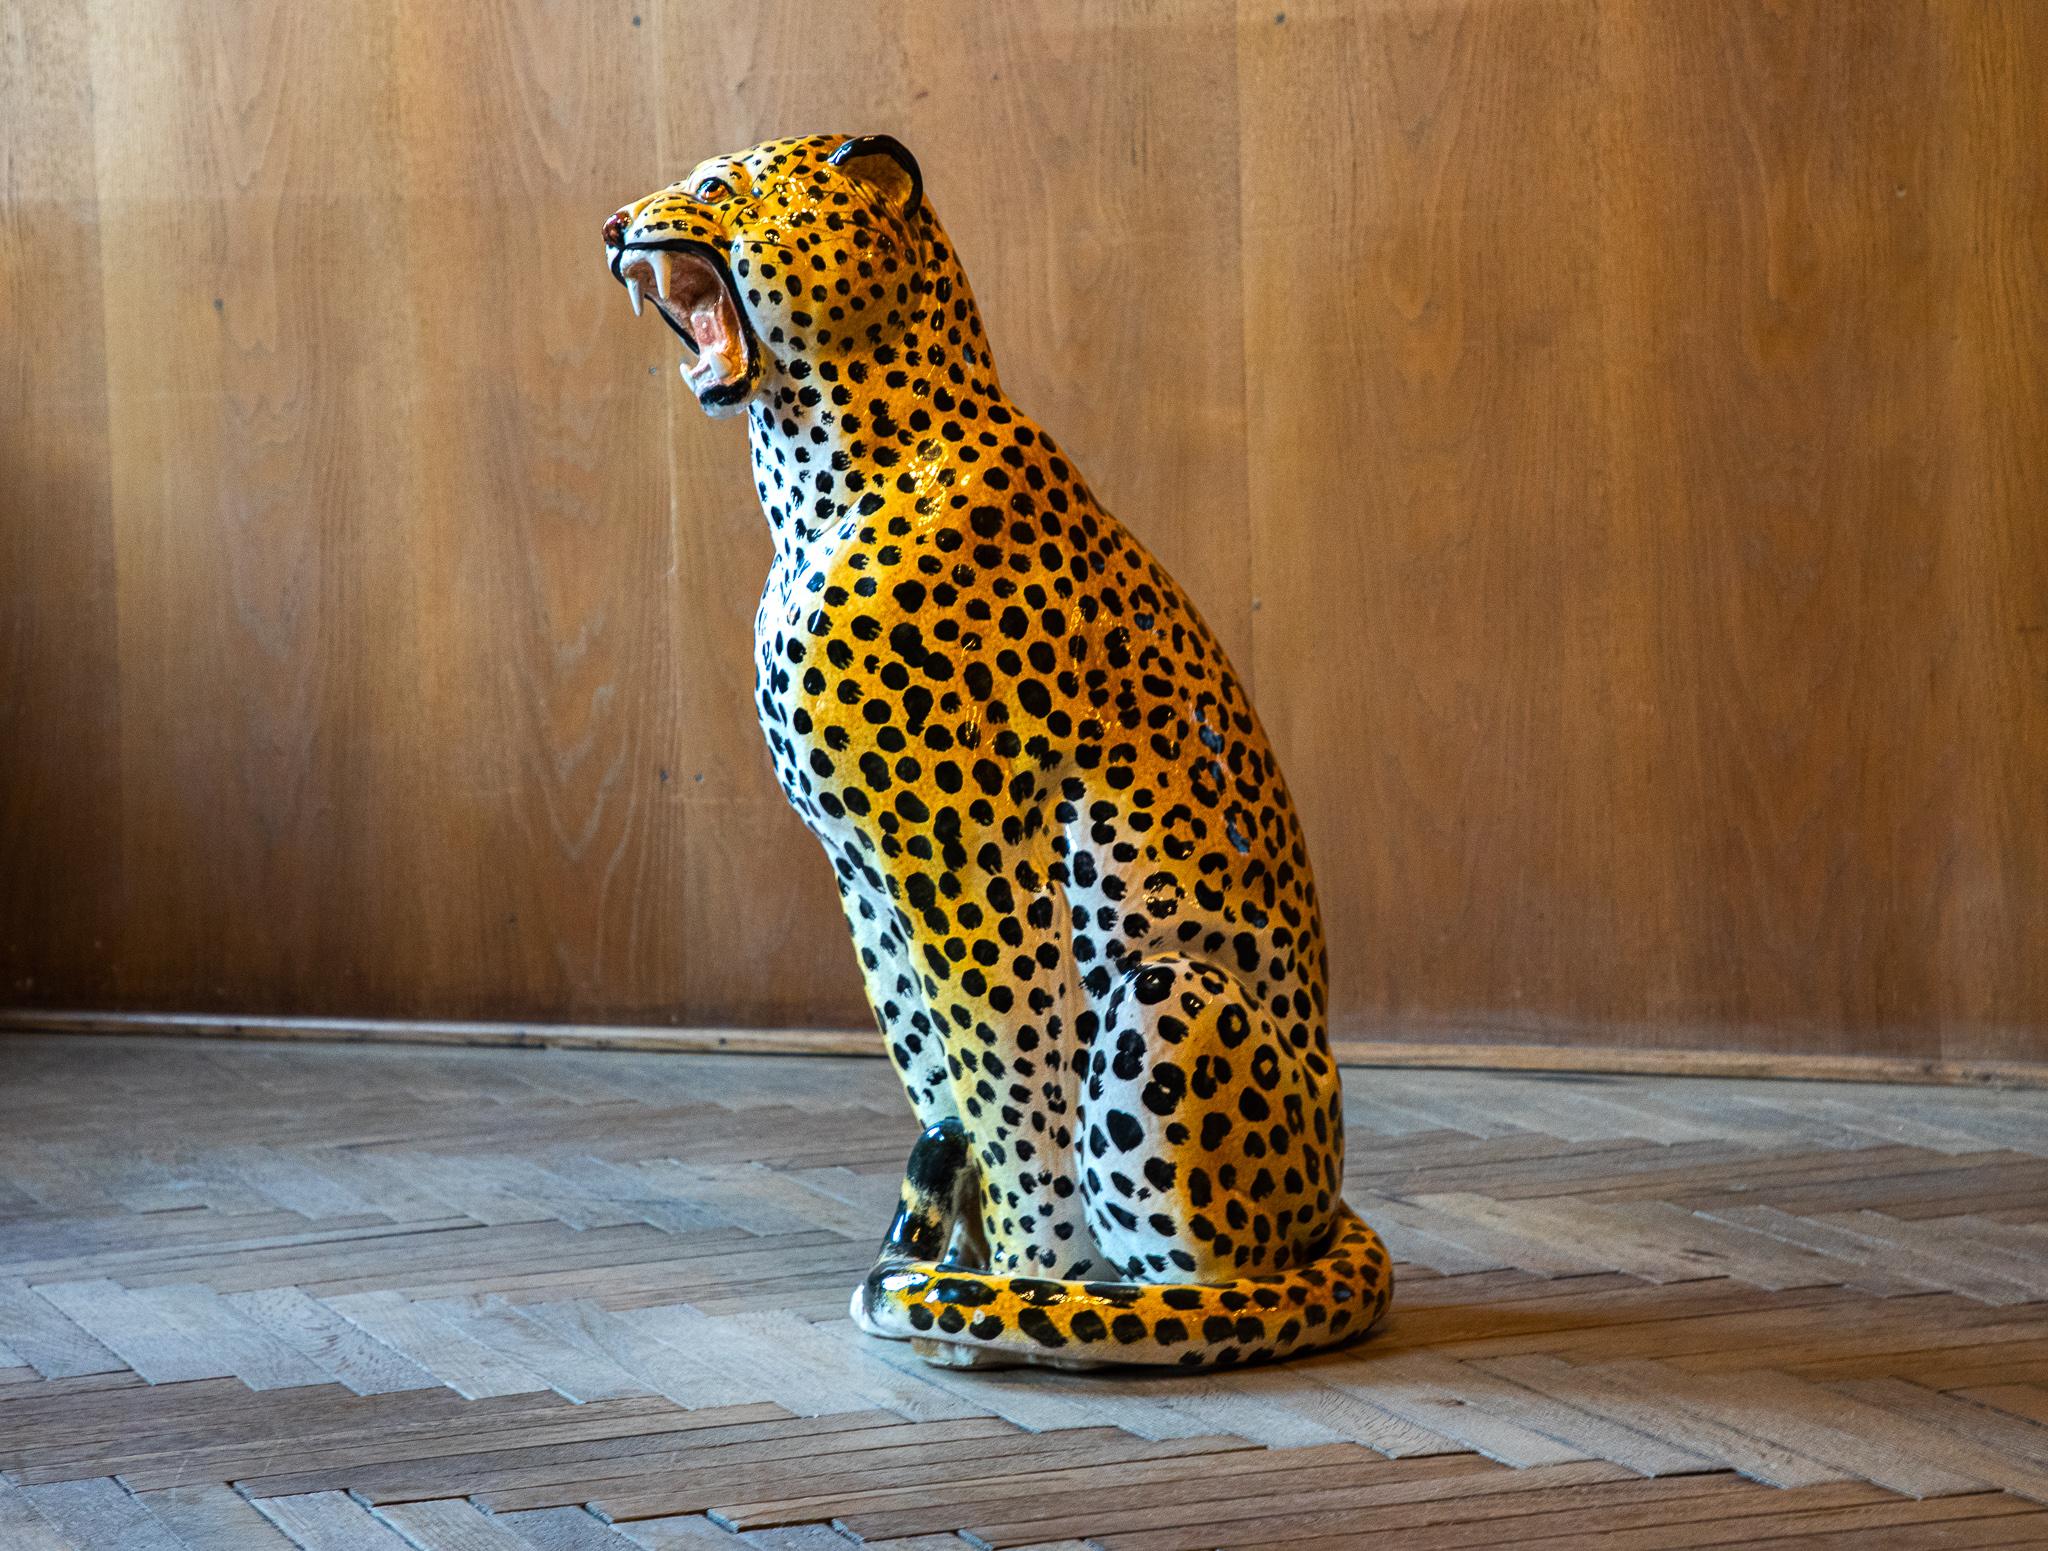 Mid-Century Modern Italian glazed ceramic leopard sculpture, Italy 1970s.

This extraordinary Italian ceramic Leopard sculpture from the 70s is one of the most fierce statement pieces! Nowadays you find them back in contemporary and eclectic